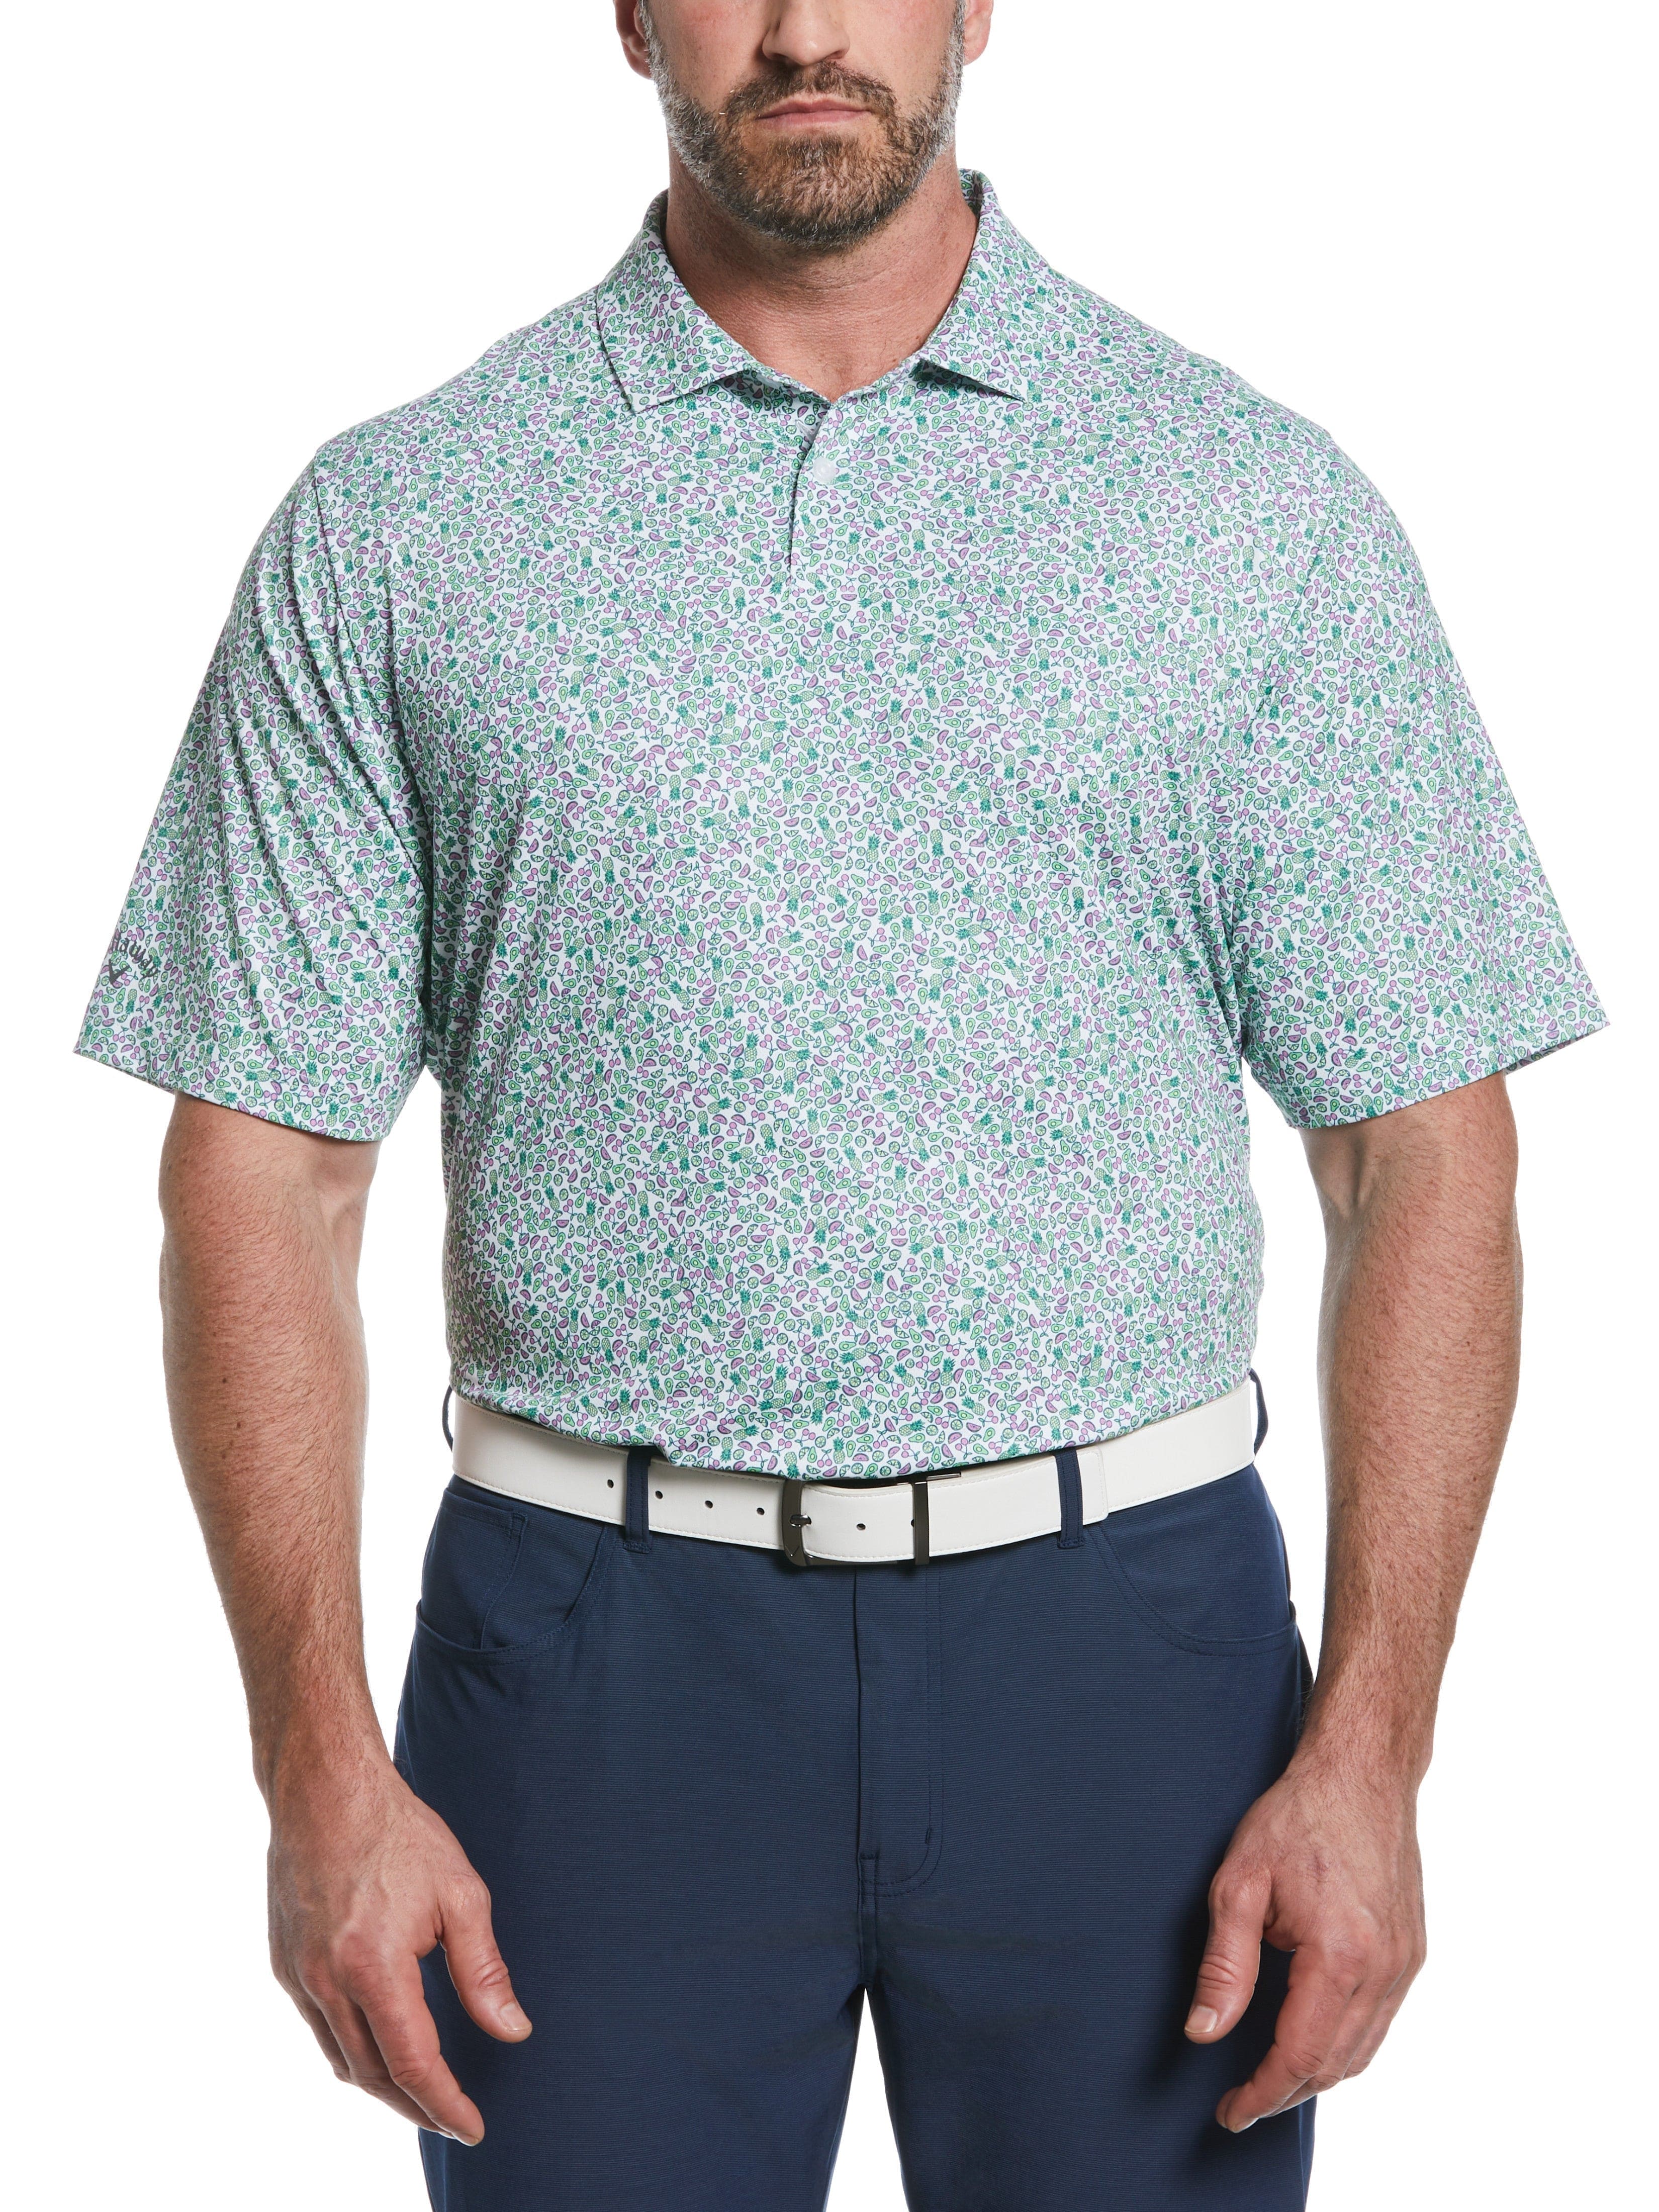 Callaway Apparel Mens Big & Tall Ventilated Tropical Fruit Print Golf Polo Shirt, Size 2XLT, Polyester/Recycled Polyester/Elastane